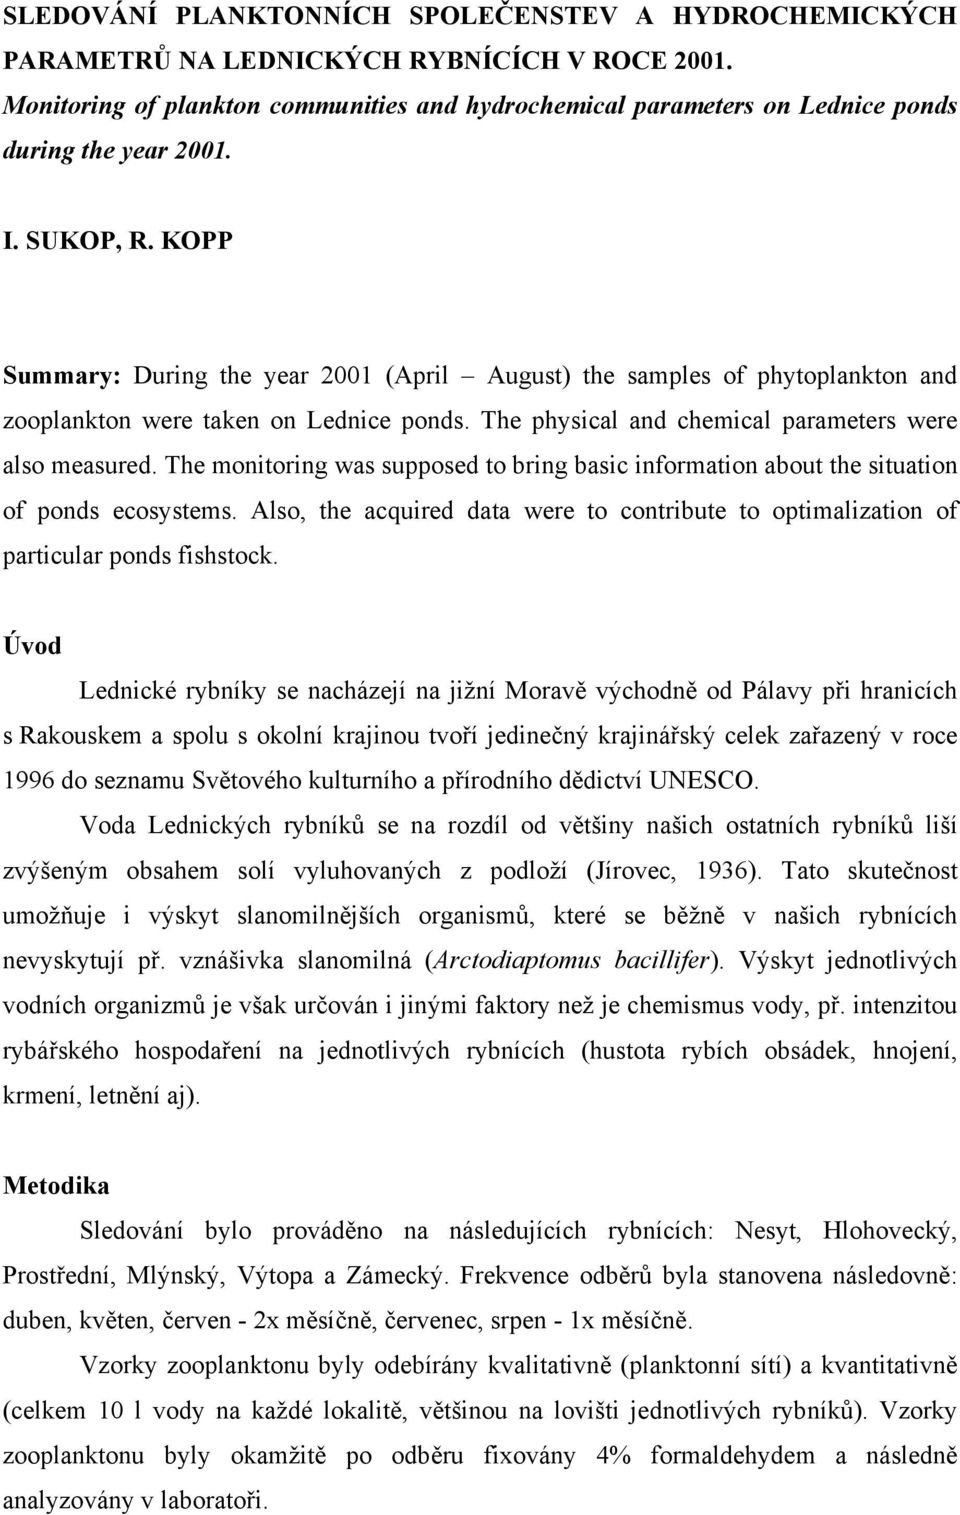 KOPP Summary: During the year 2001 (April August) the samples of phytoplankton and zooplankton were taken on Lednice ponds. The physical and chemical parameters were also measured.